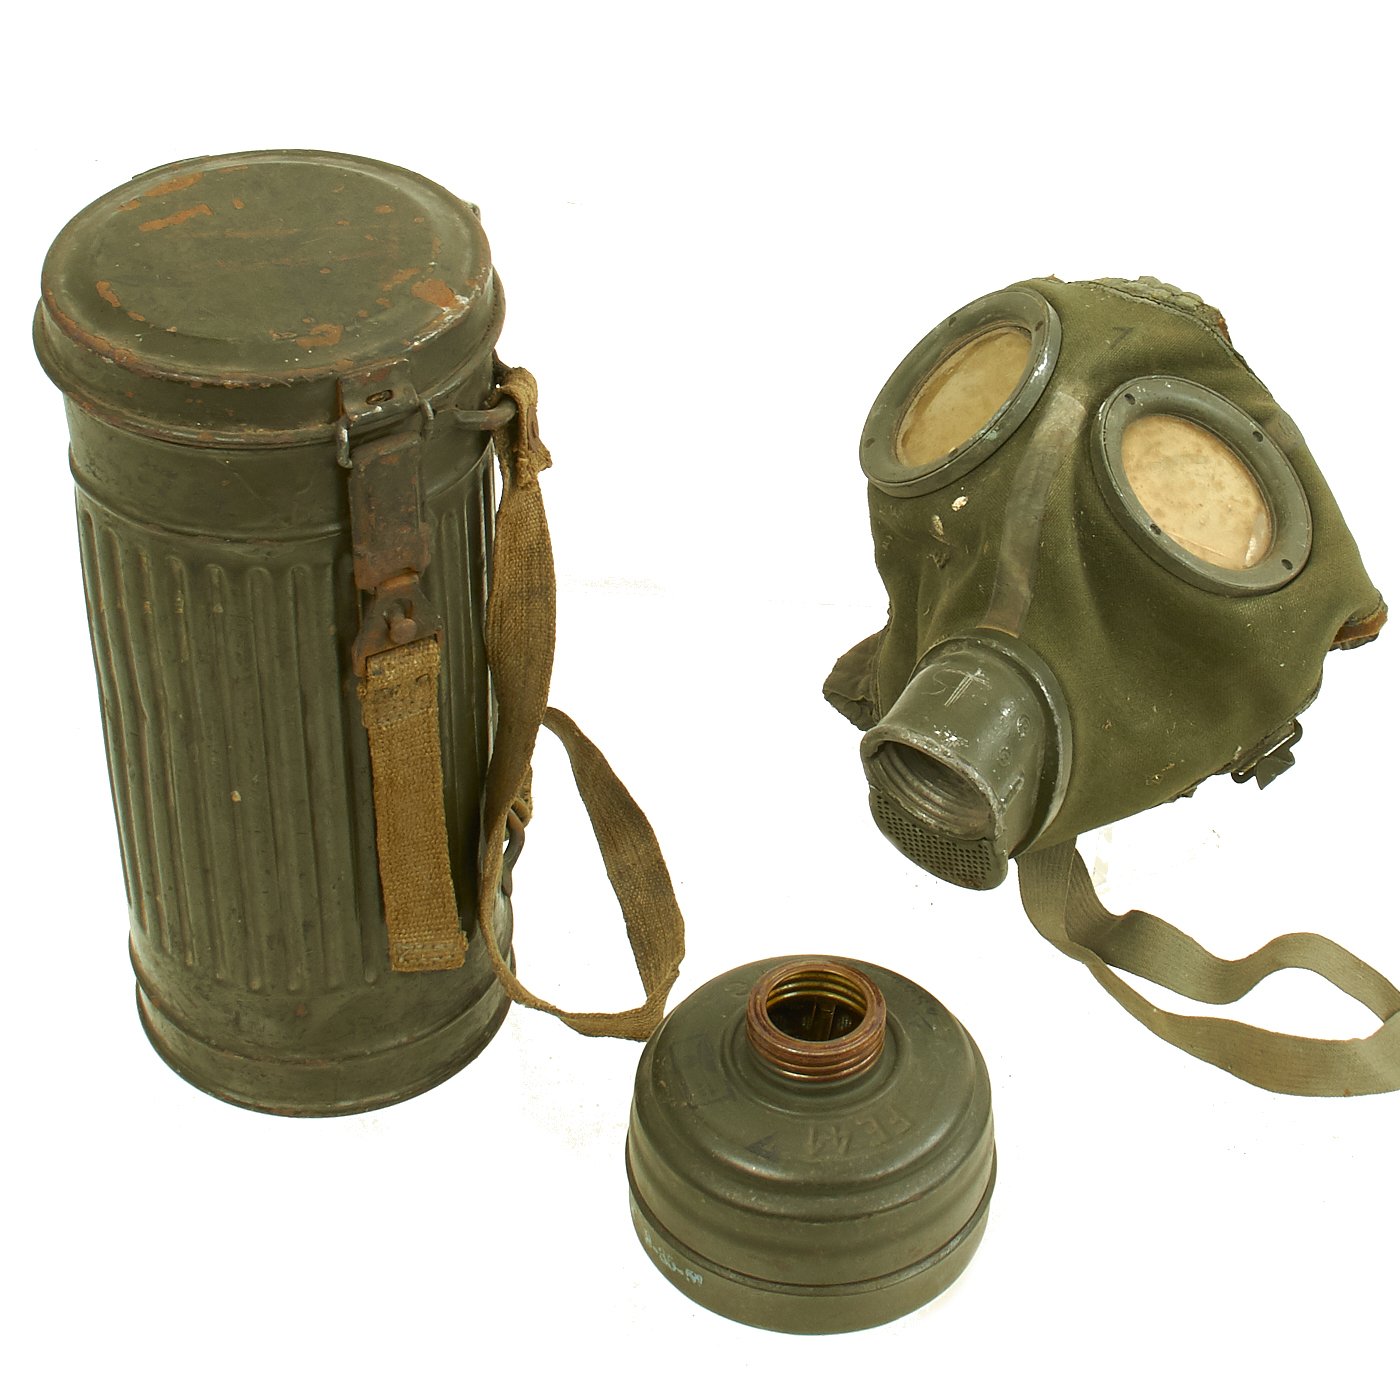 Original German M30 Model Gas Mask 1 with Filter and – International Military Antiques